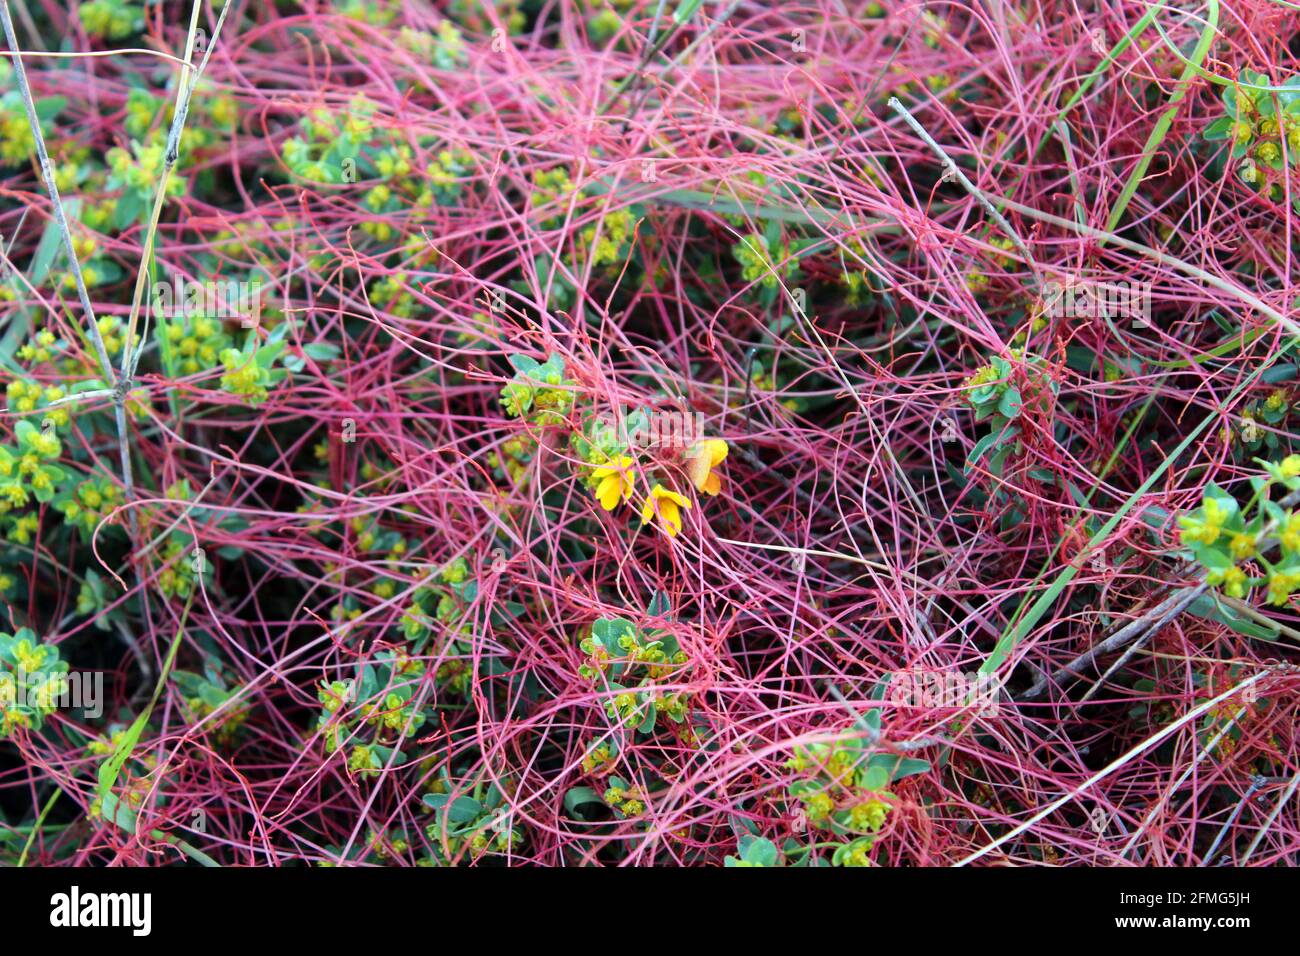 Dodder (Cuscuta epithymum), a parasitic plant entangling and attaching itself to a host plant, Birdsfoot Trefoil Lotus corniculatus, Freginals, Spain Stock Photo